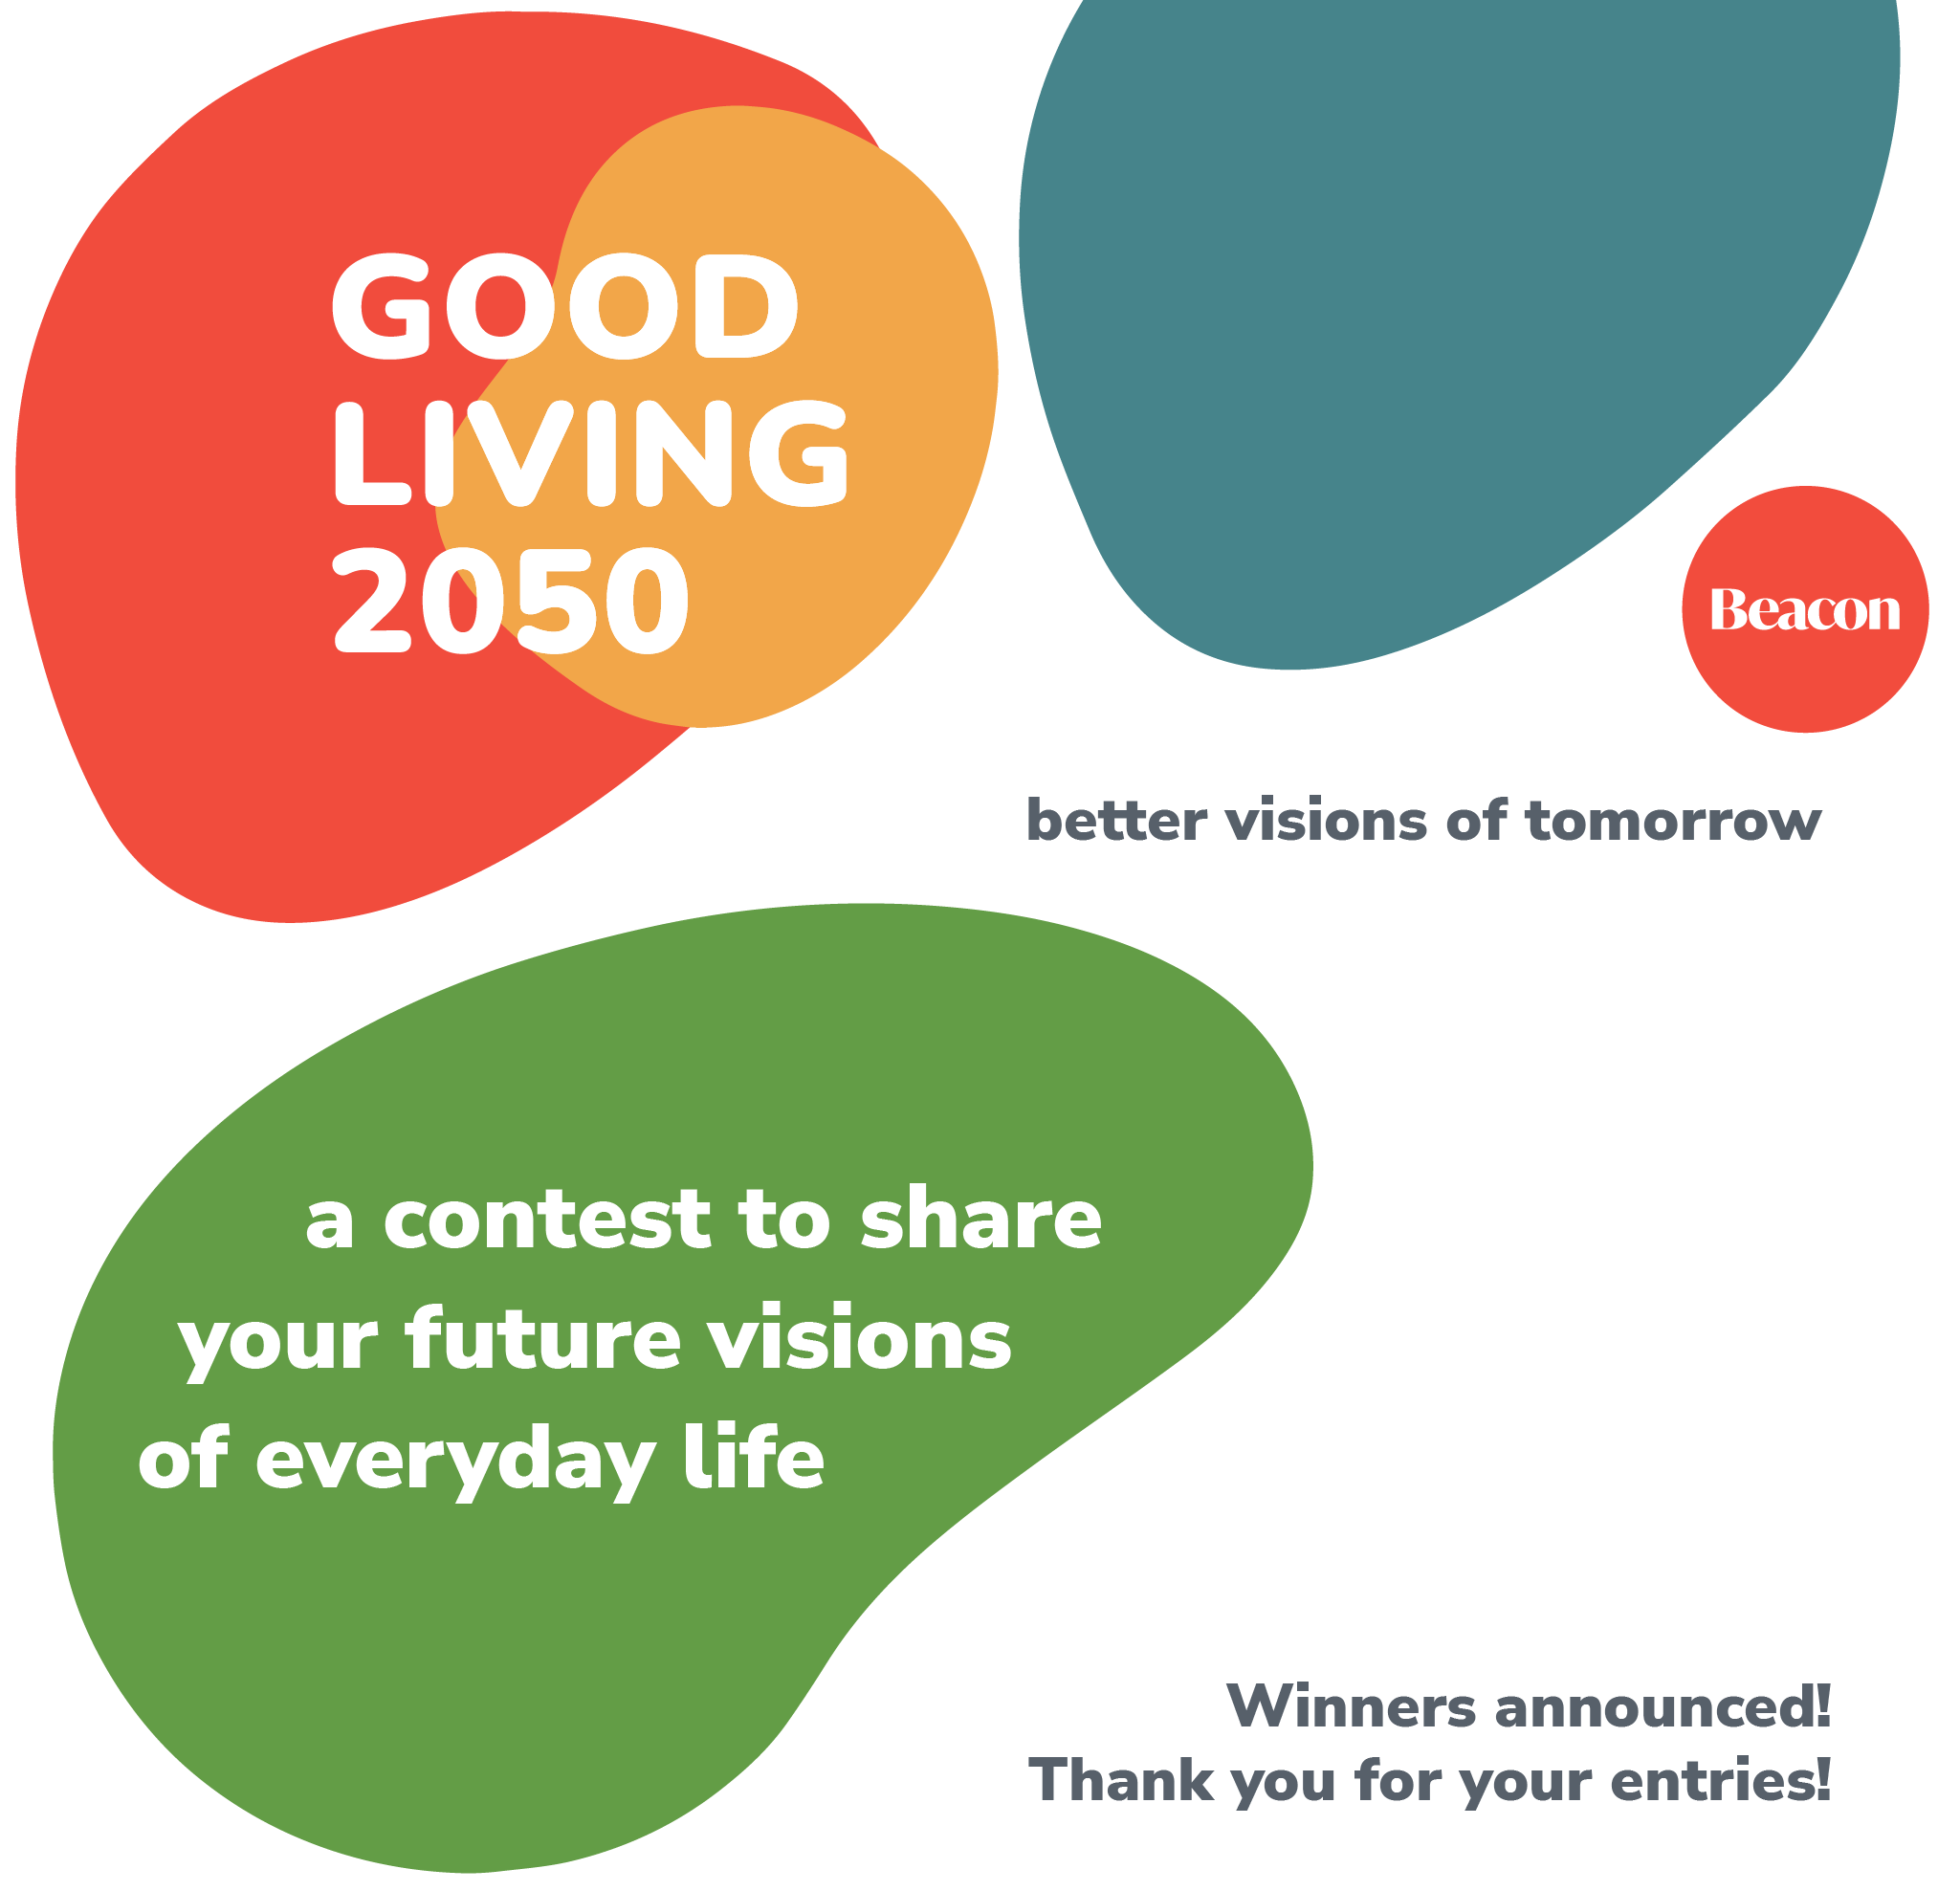 Good Living 2050 contest, better visions of tomorrow. A contest to share your future visions od everyday life. Submit by 15 feb 2023 for a chance to win cash prizes.